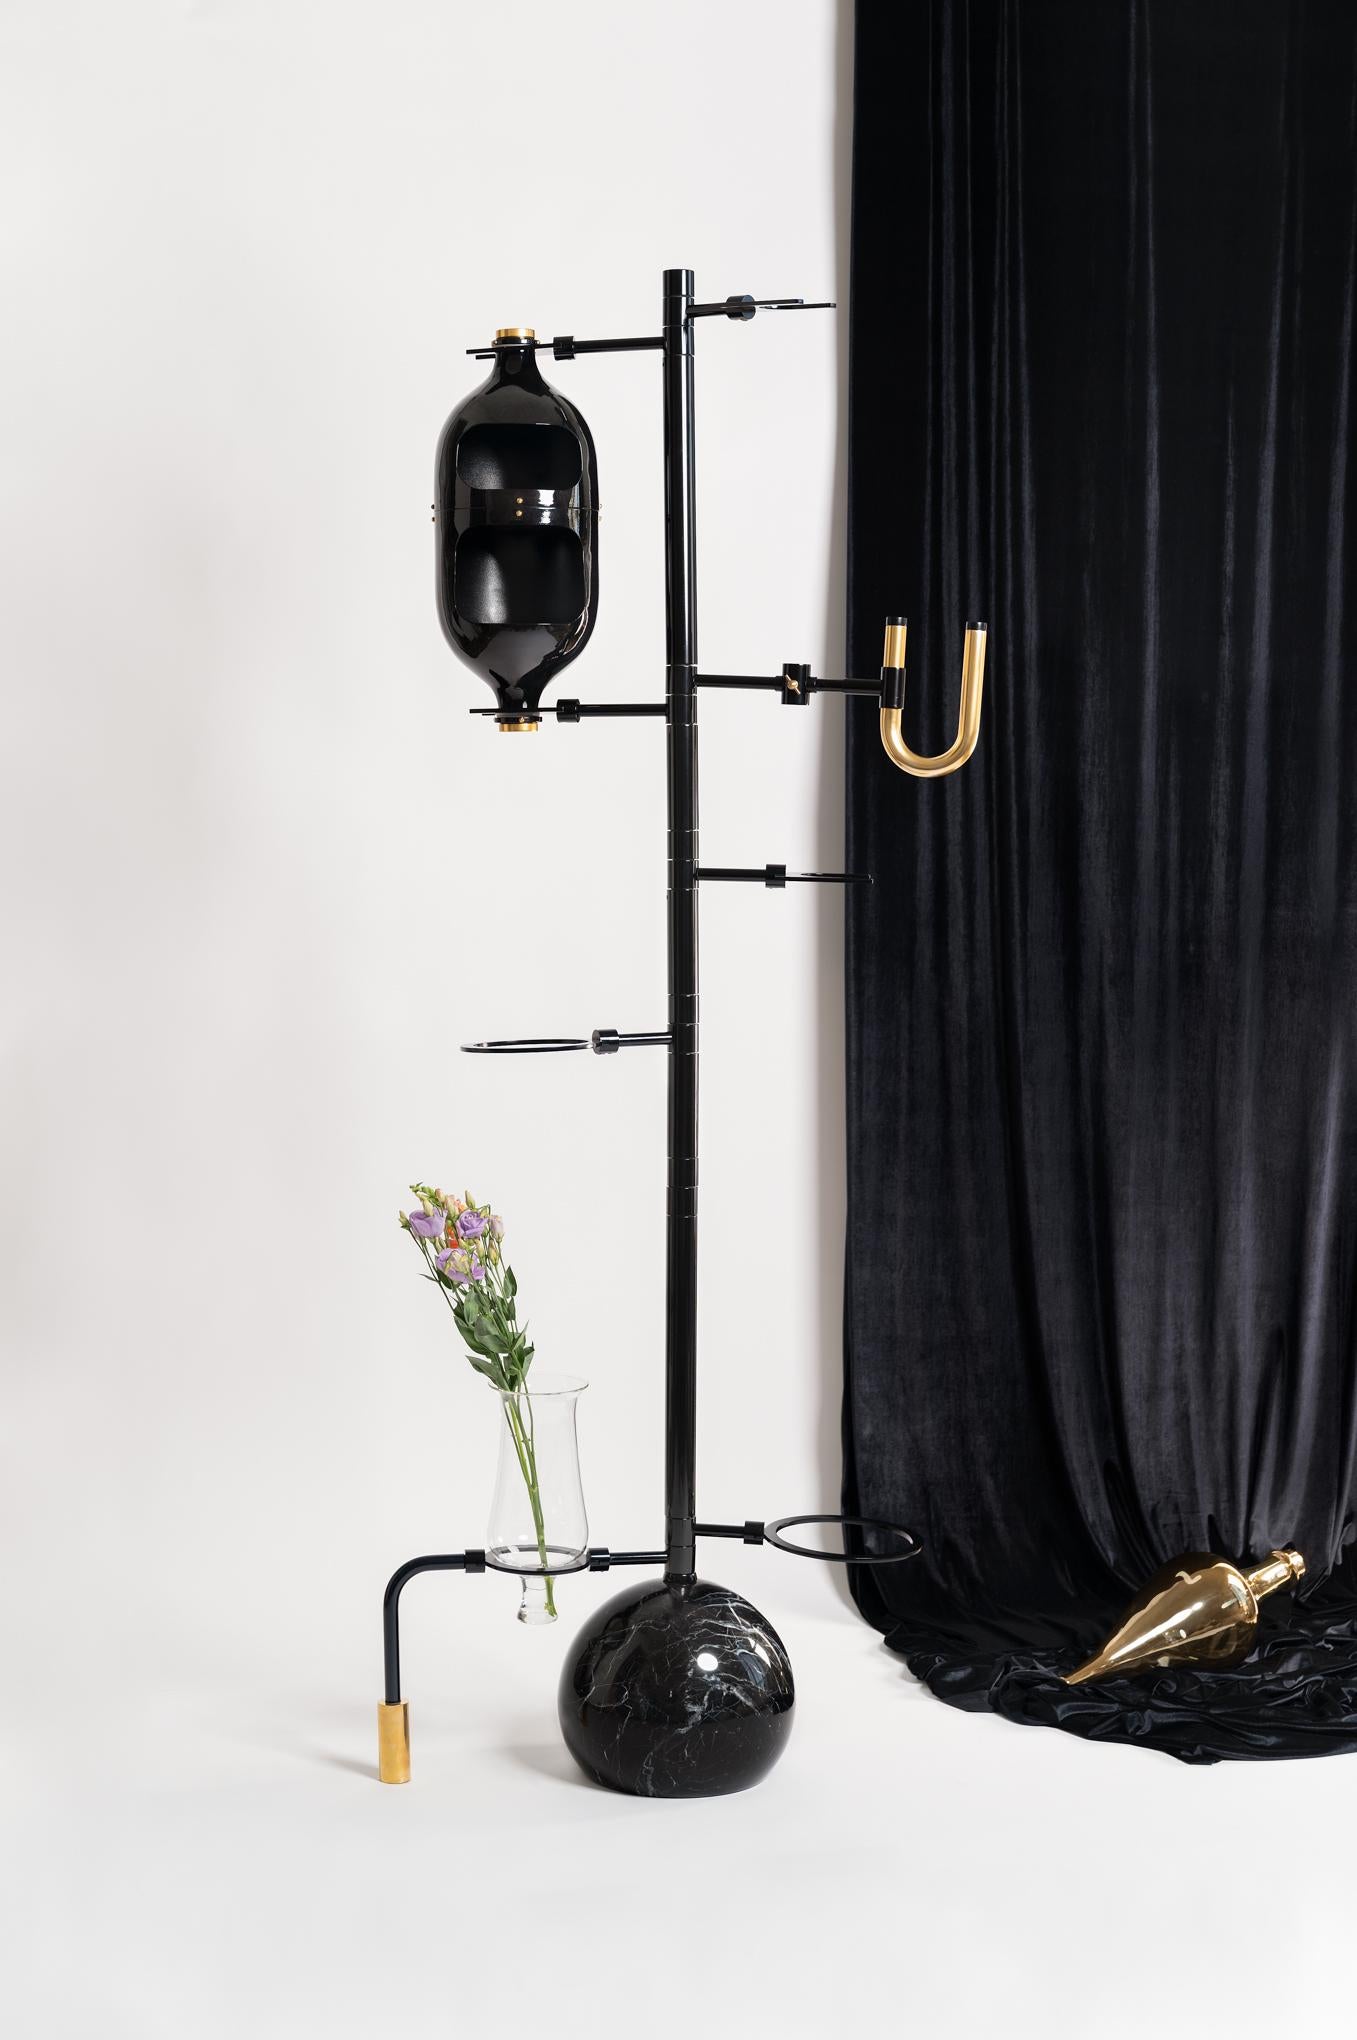  Interior designer Hania Jneid looked to chemistry sets when designing her elaborate floor lamp, named the Emotional Lab light.

The Emotional Lab floor lamp consists of a slender metal stand supporting several beaker-like glass vessels that light